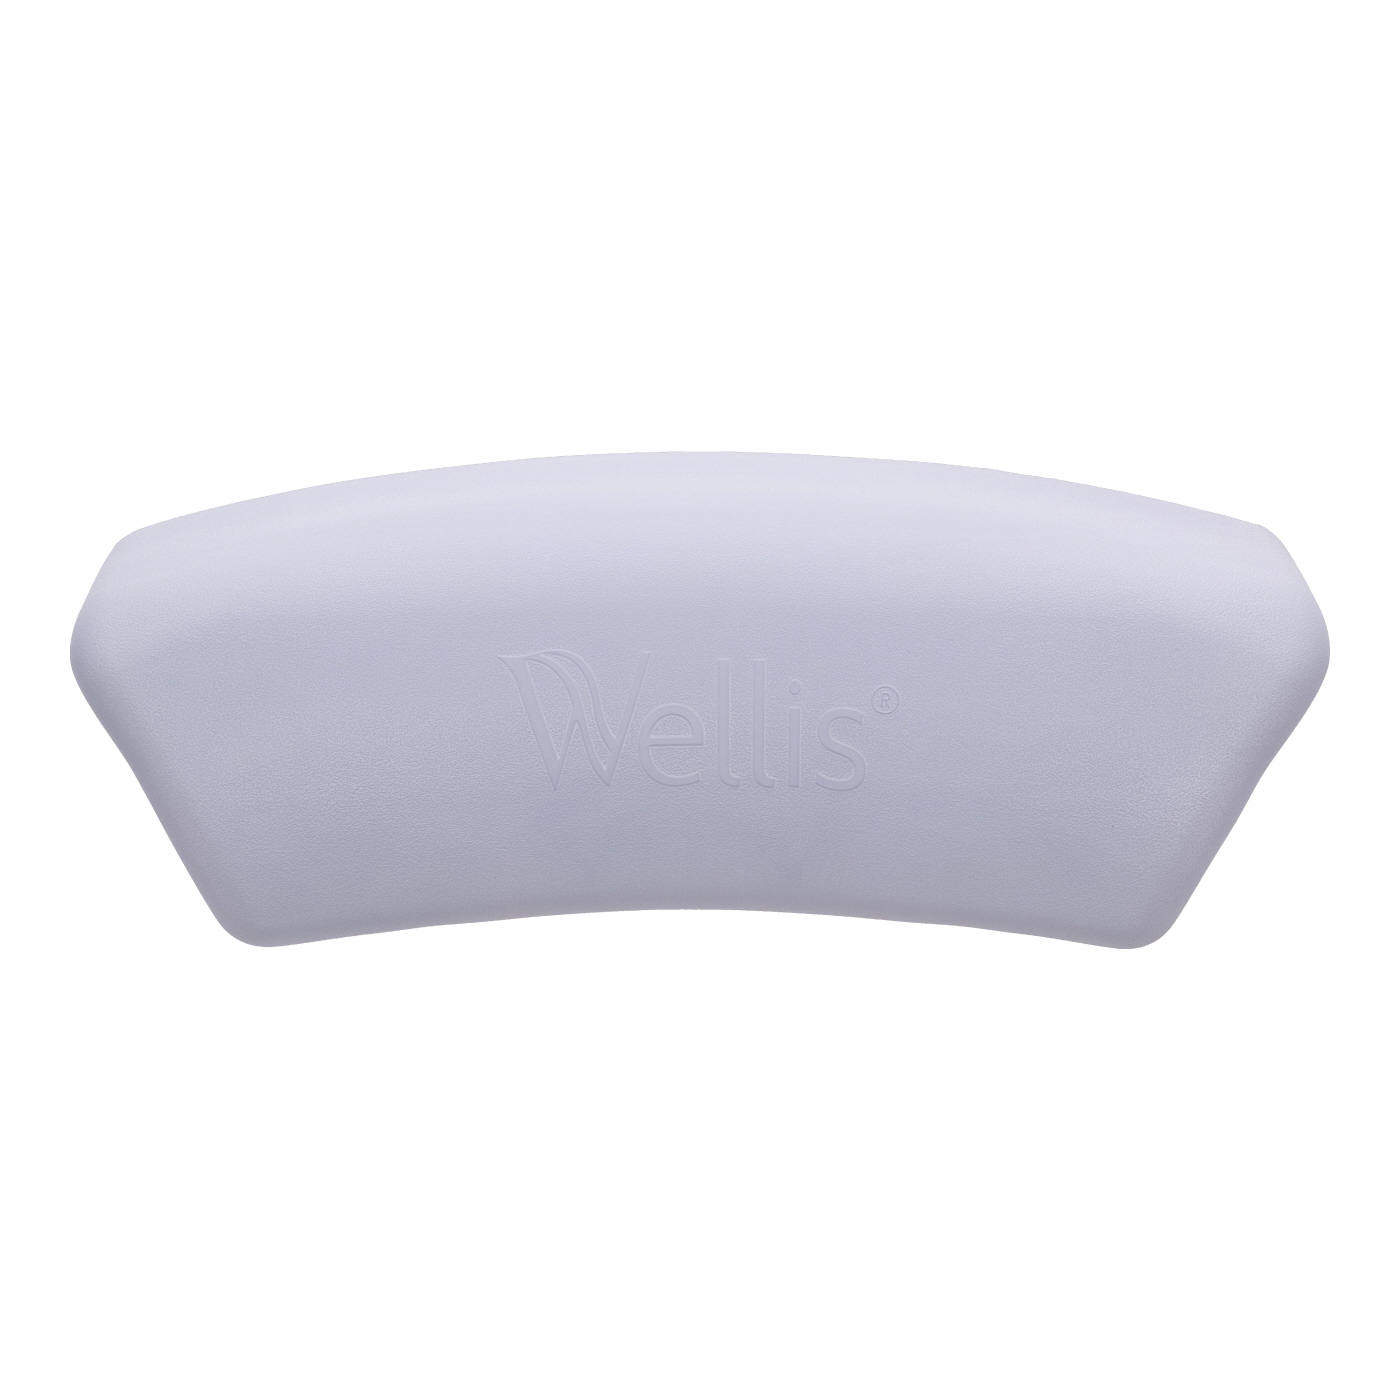 AF00065 Replacement Pillow for Wellis® spas